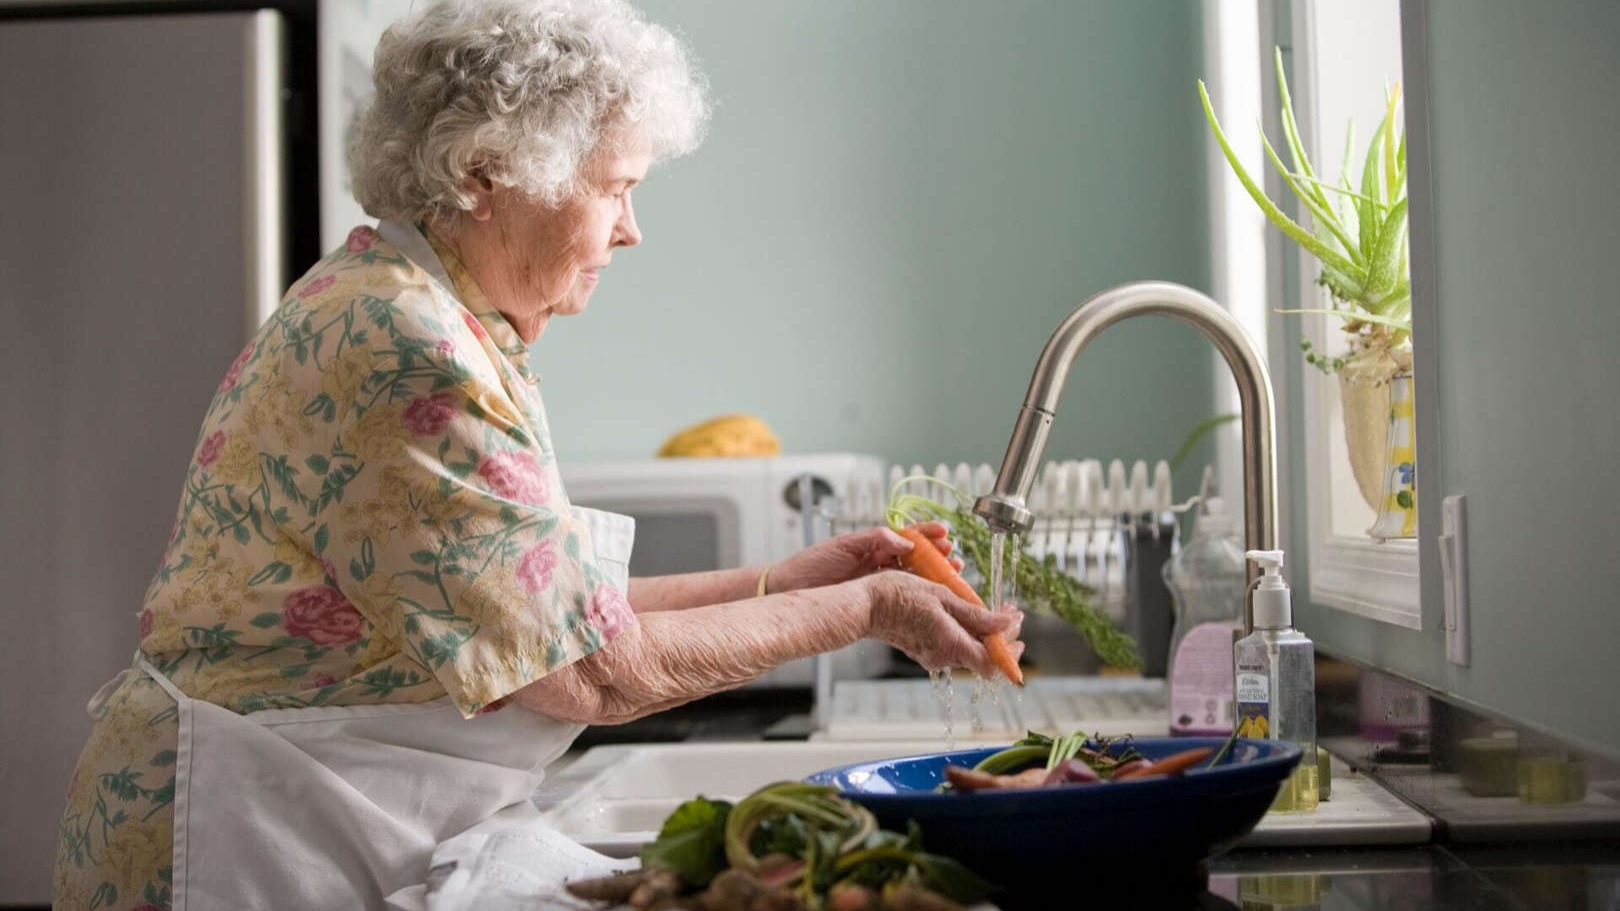 Everyone makes mistakes, but people with dementia may find it increasingly difficult to do things like keep track of monthly bills or follow a recipe ...